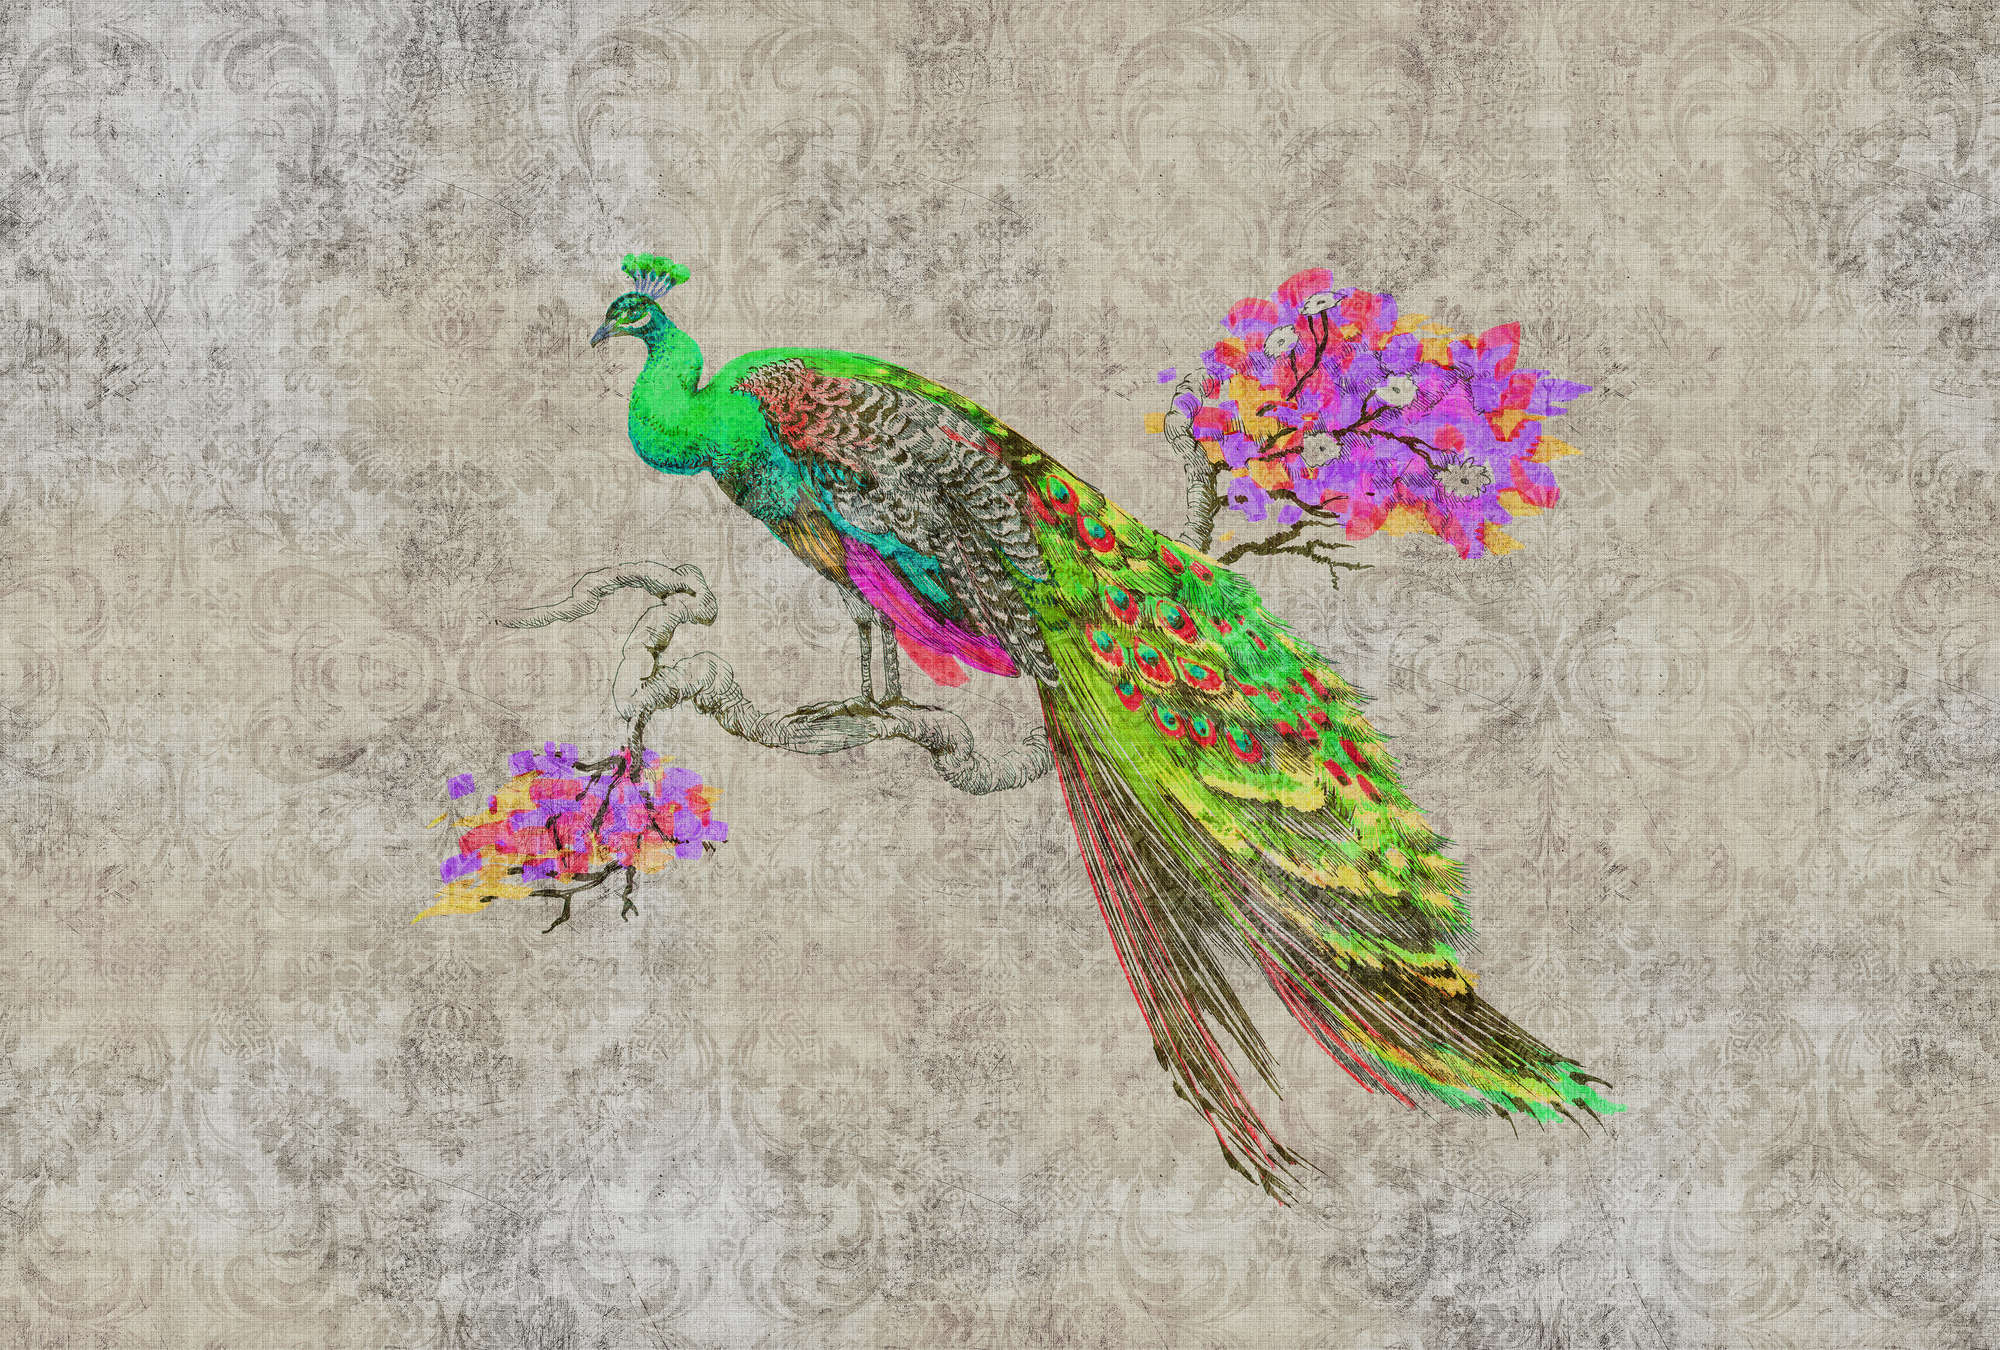             Peacock 1 - Nature linen structure wallpaper with peacock in neon colours - Green, Pink | Pearl smooth non-woven
        